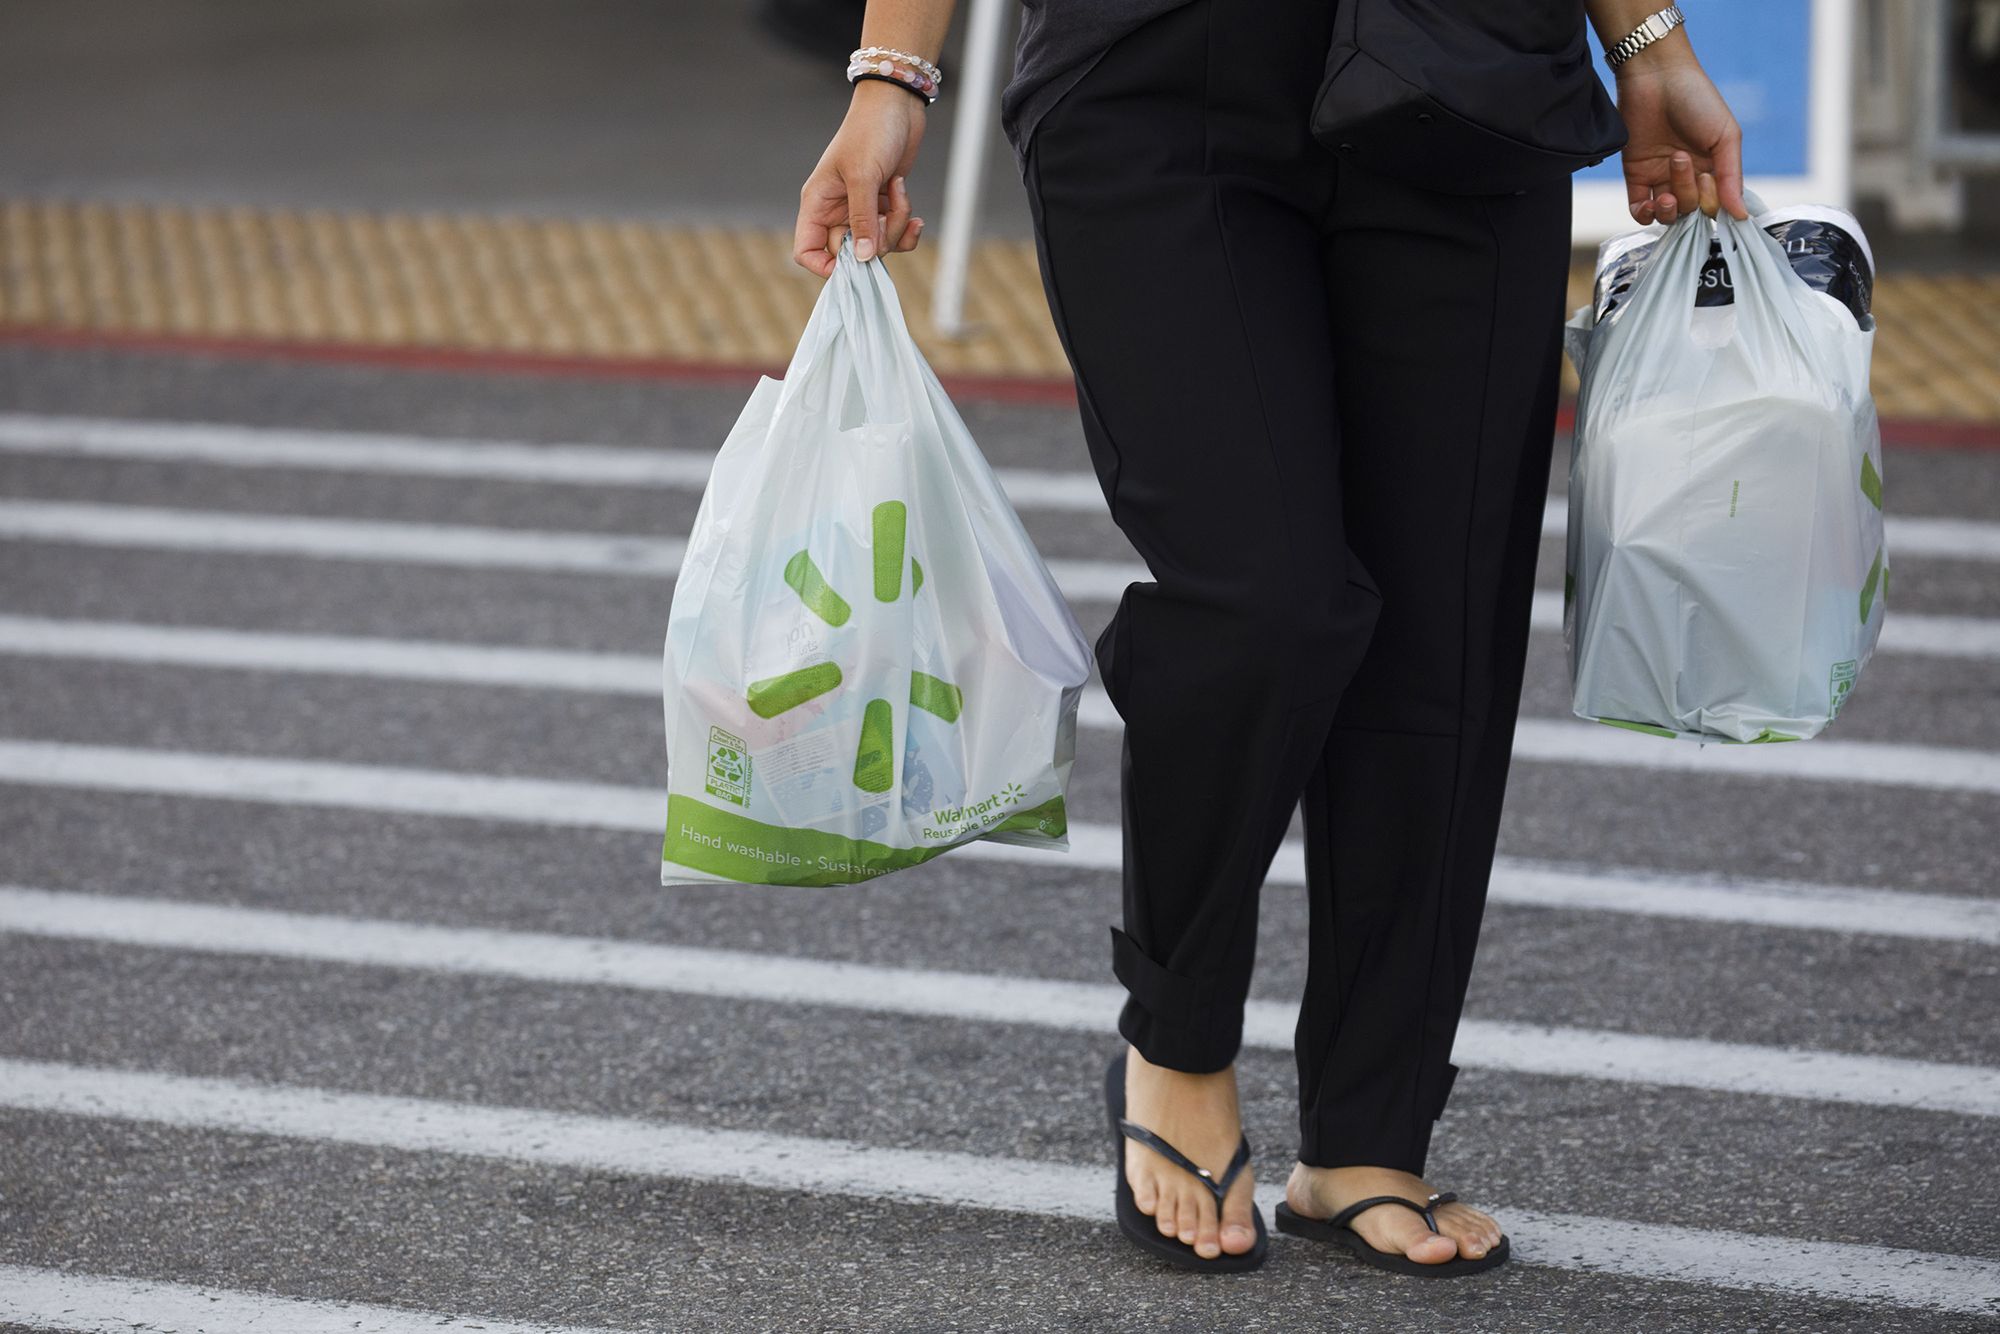 Are reusable bags better than plastic bags?